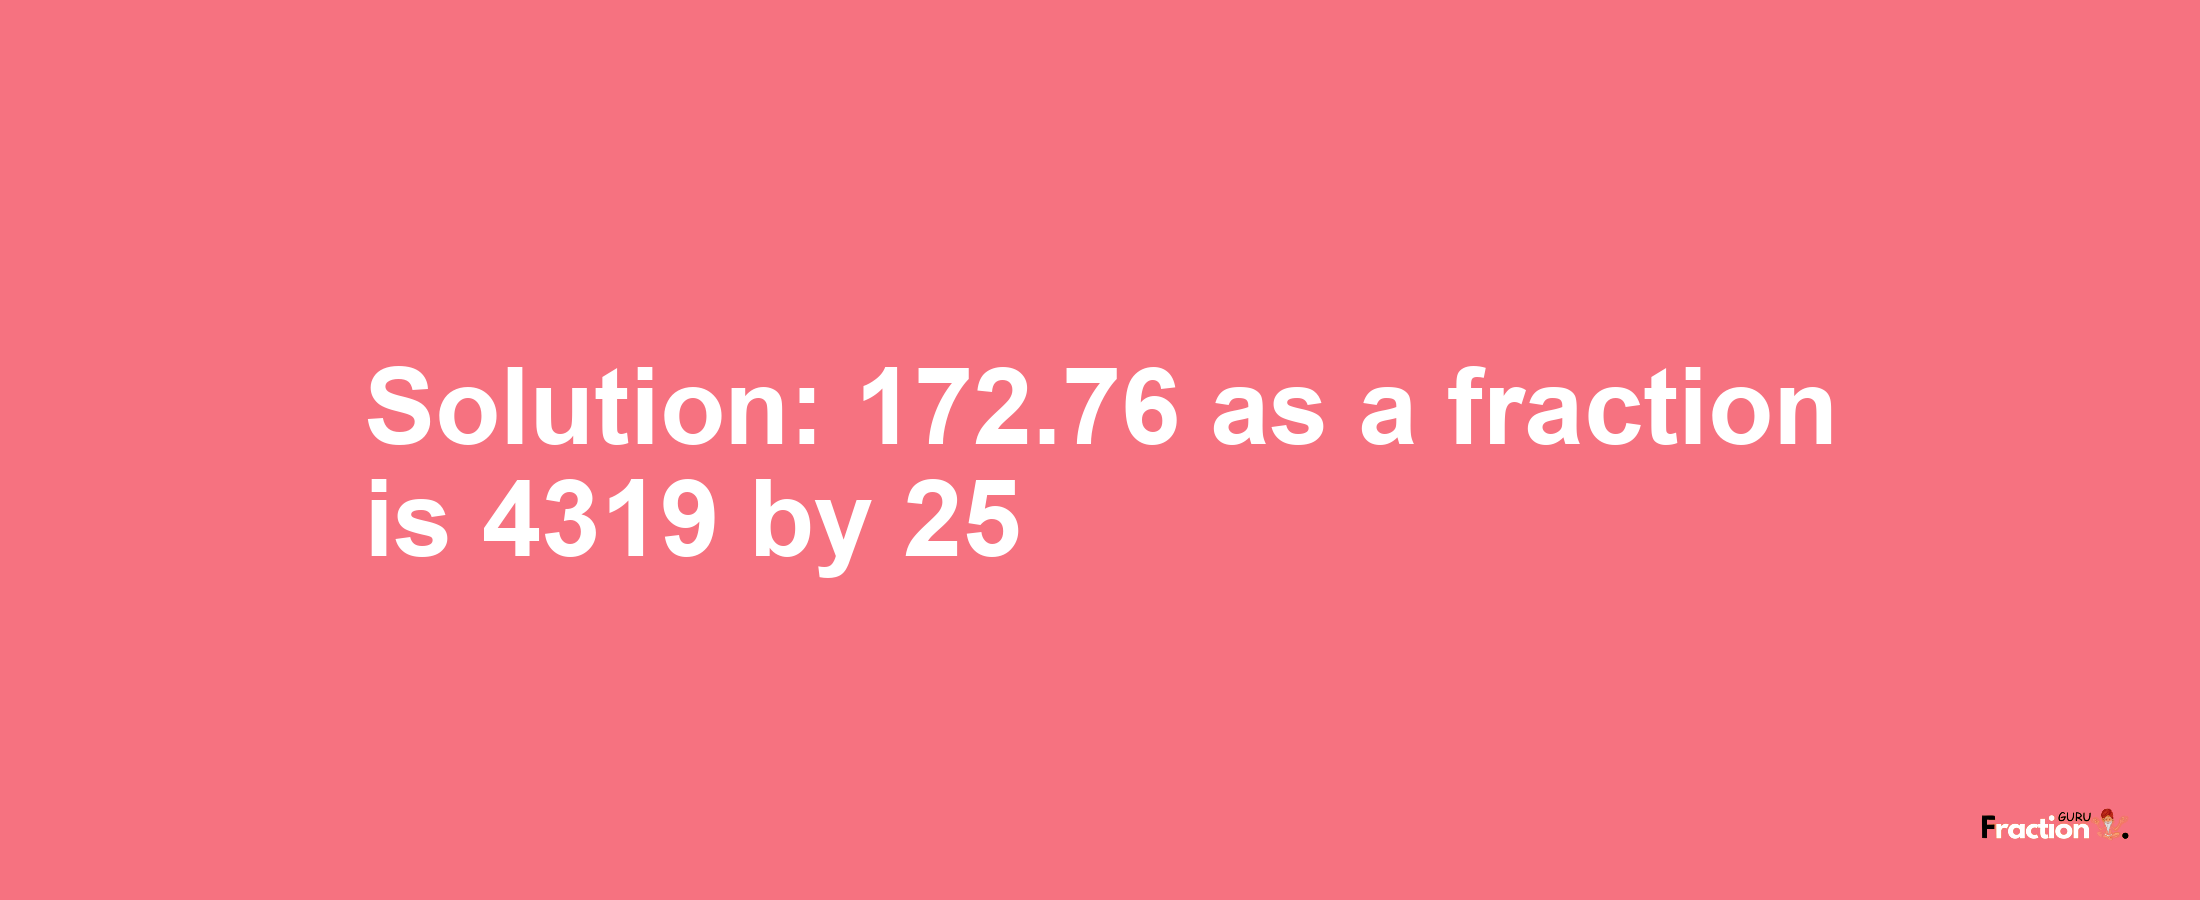 Solution:172.76 as a fraction is 4319/25